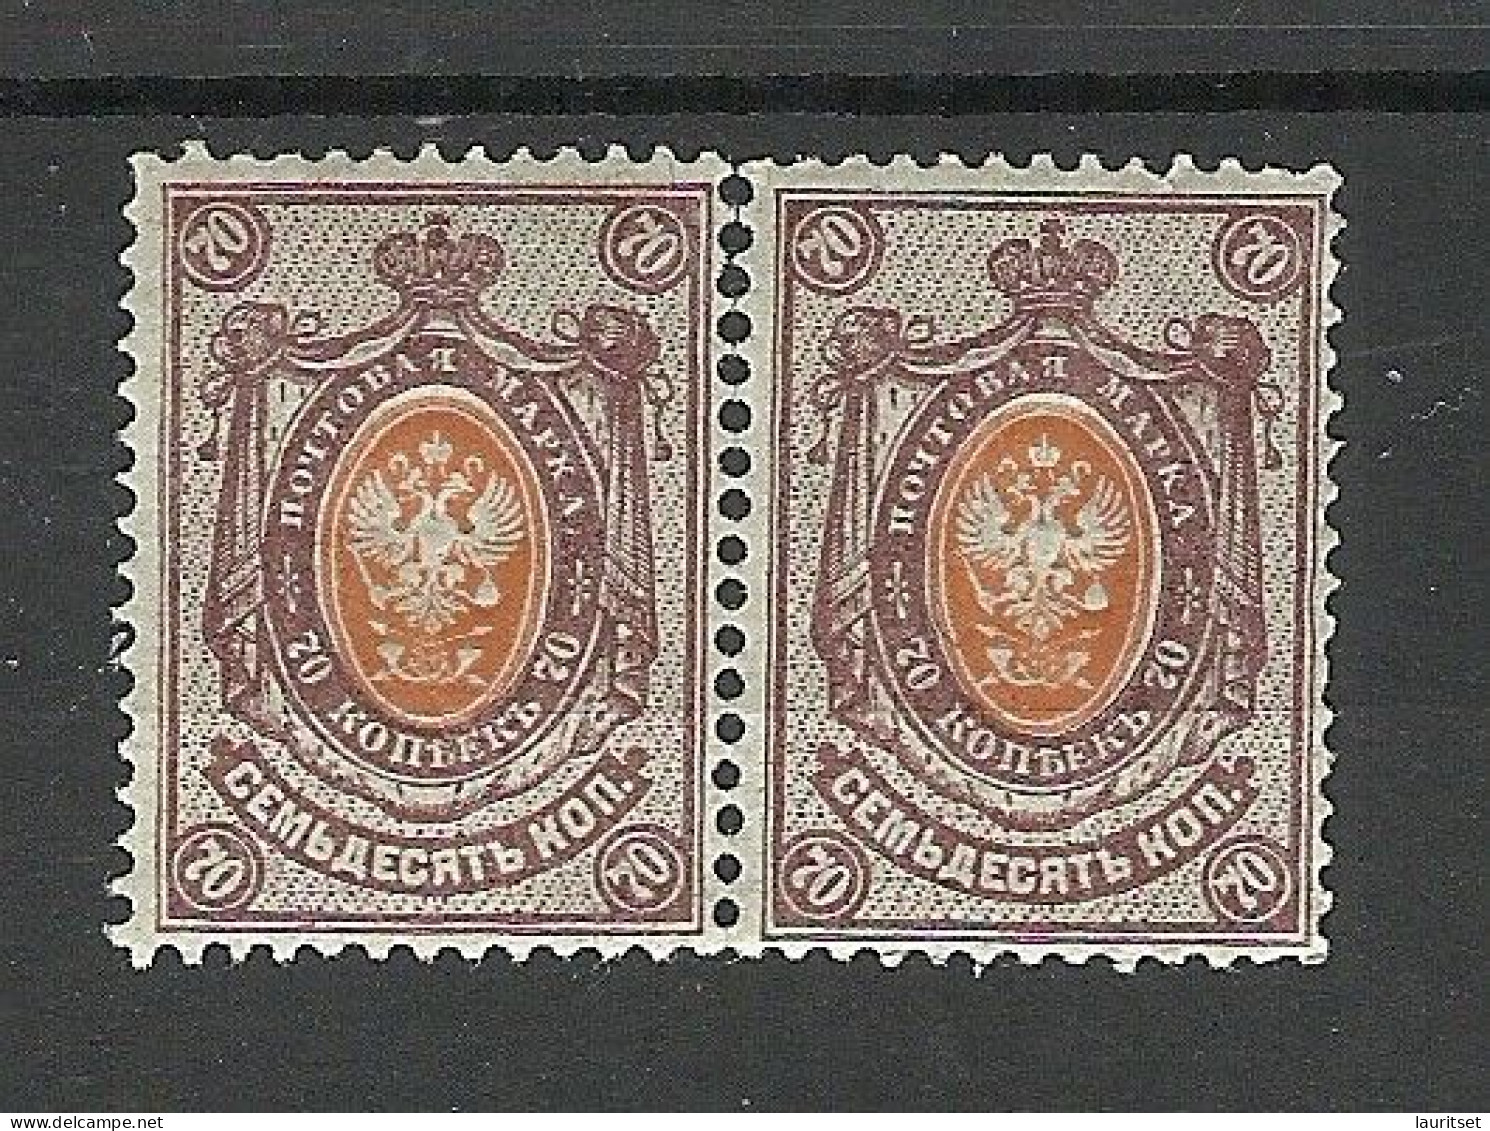 Russia Russland 1909 Michel 76 I A A As Pair MNH - Unused Stamps